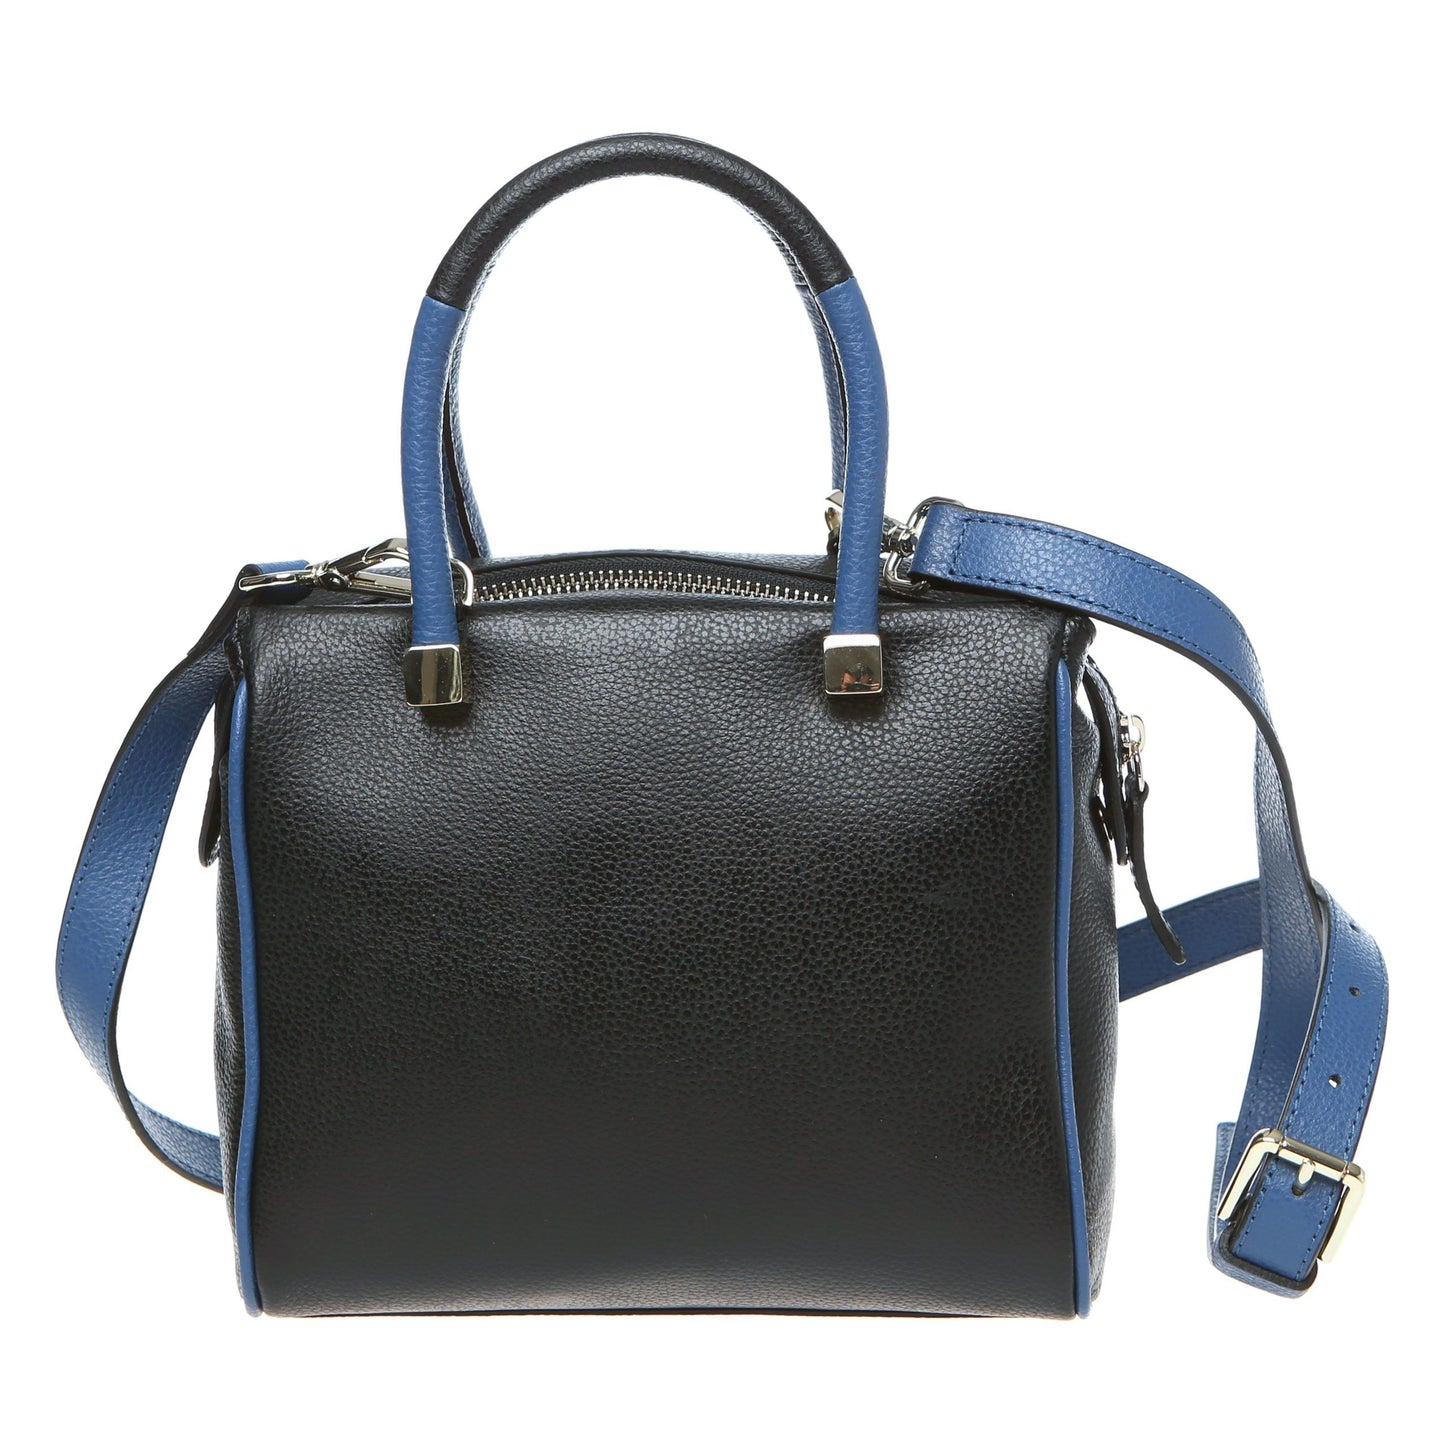 Chic Embossed Leather Handbag with Removable Strap